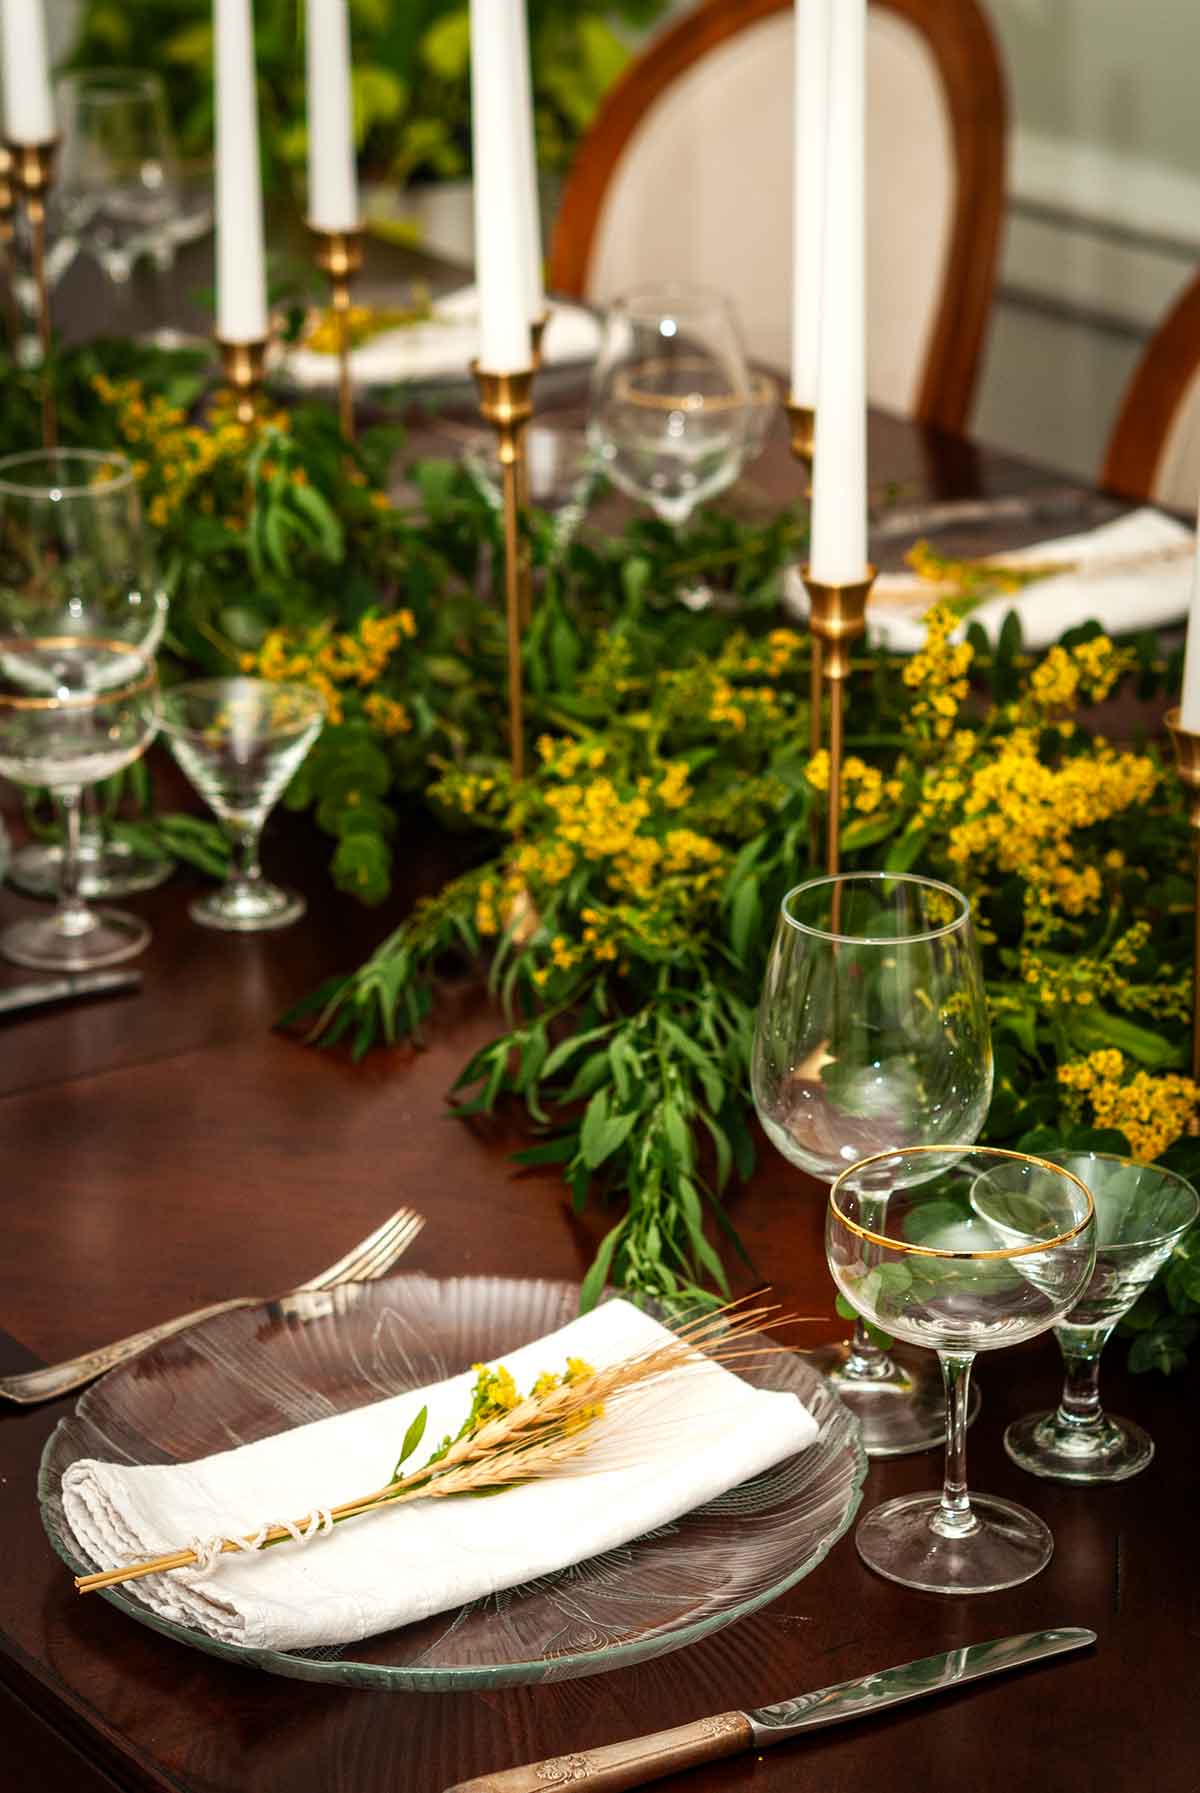 A eucalyptus and goldenrod centerpiece with candle sticks, plates and glasses on a table.